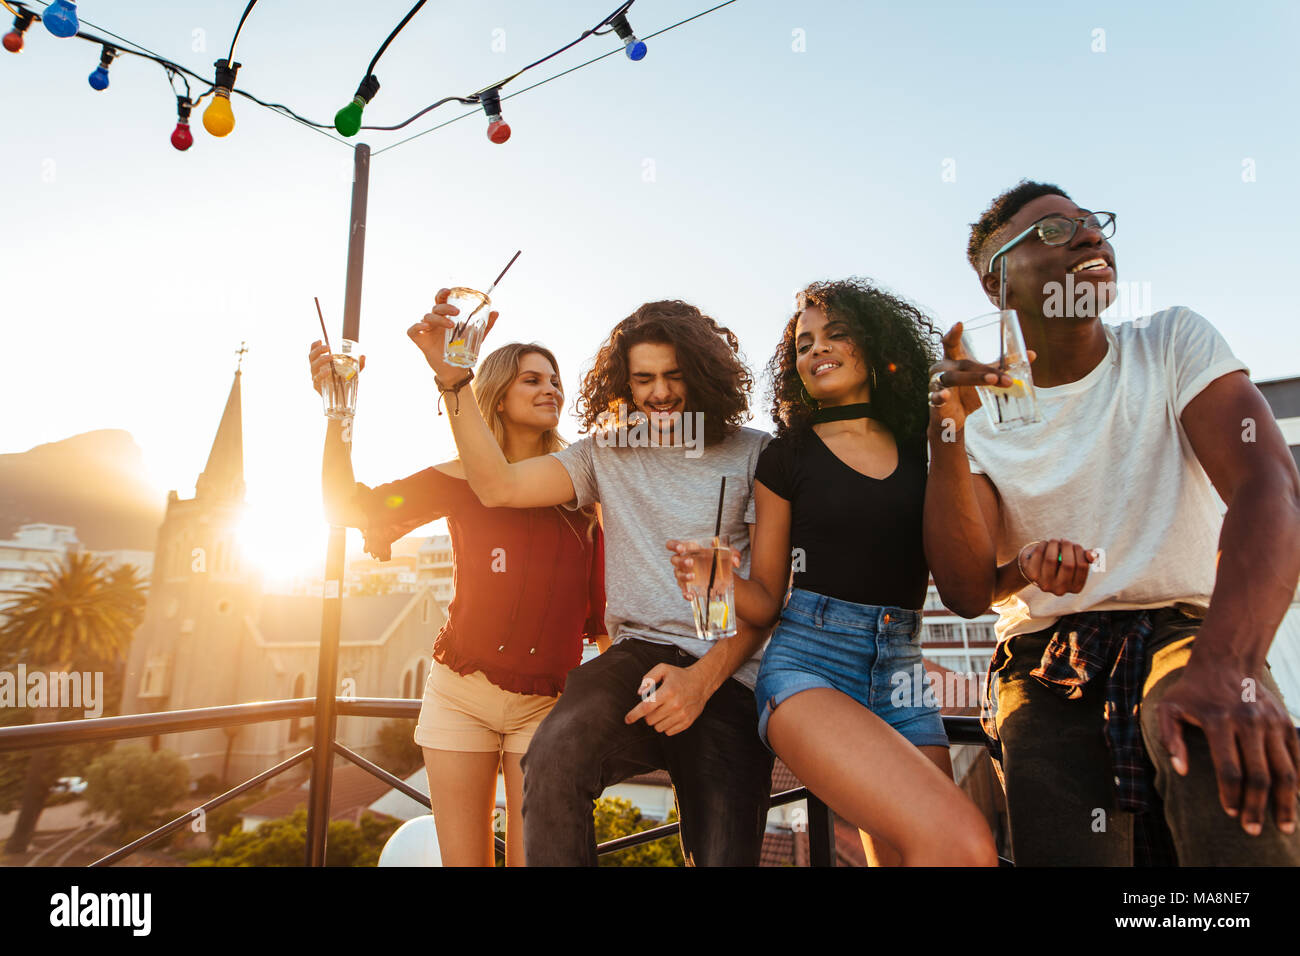 Group of young friends having fun, drinking and enjoying a evening on rooftop. Multiracial men and woman hanging out at rooftop party in evening. Stock Photo